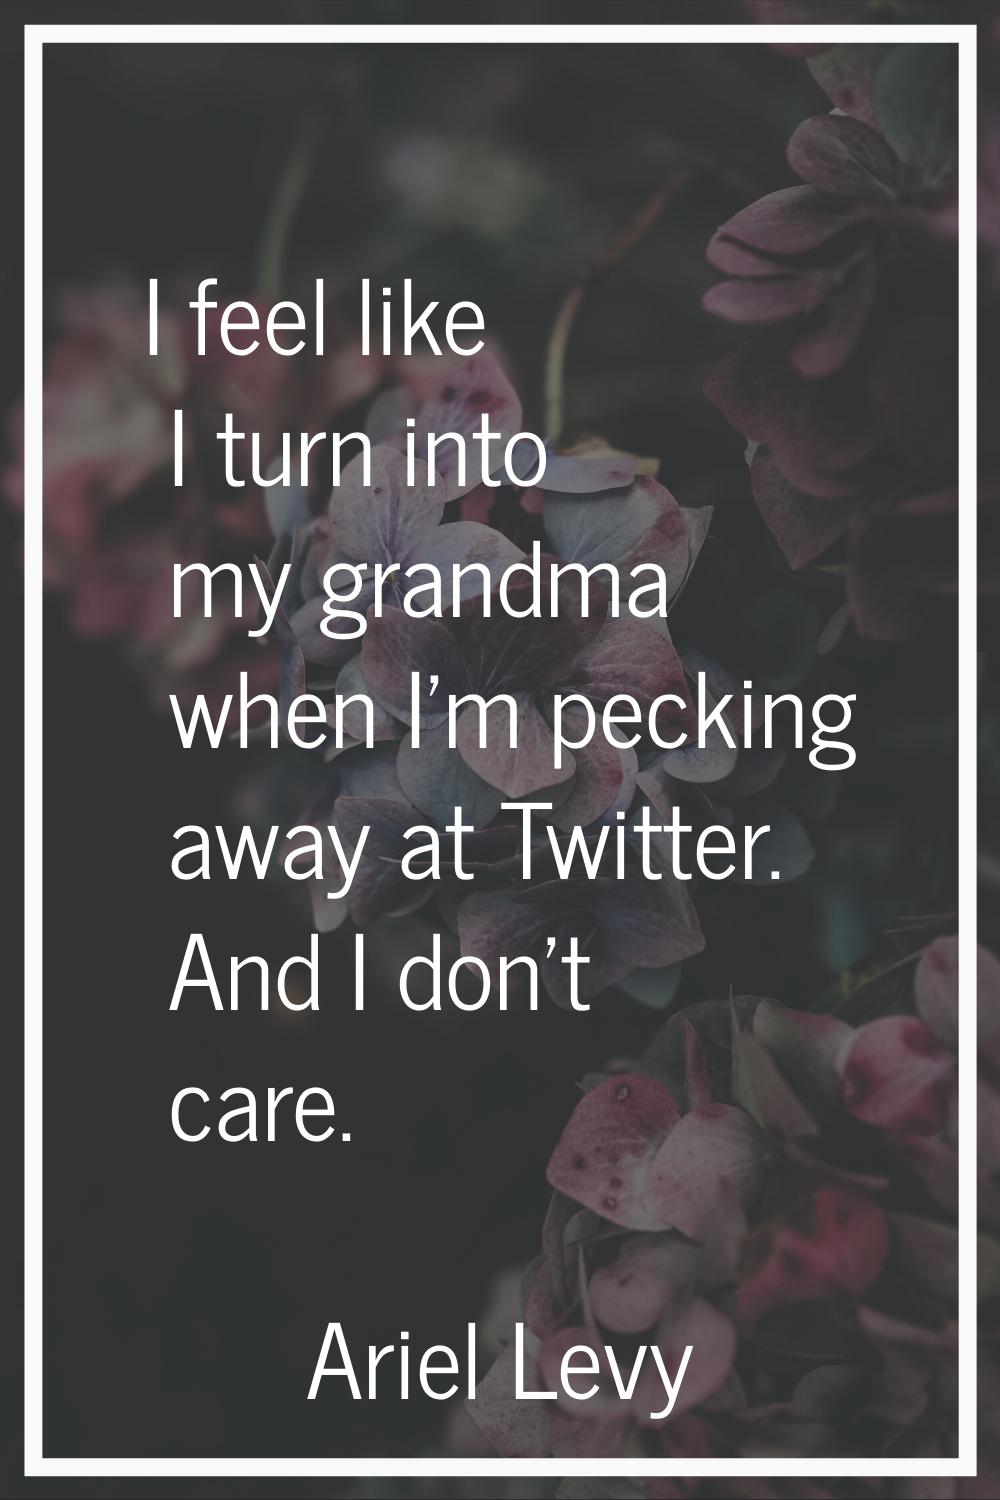 I feel like I turn into my grandma when I'm pecking away at Twitter. And I don't care.